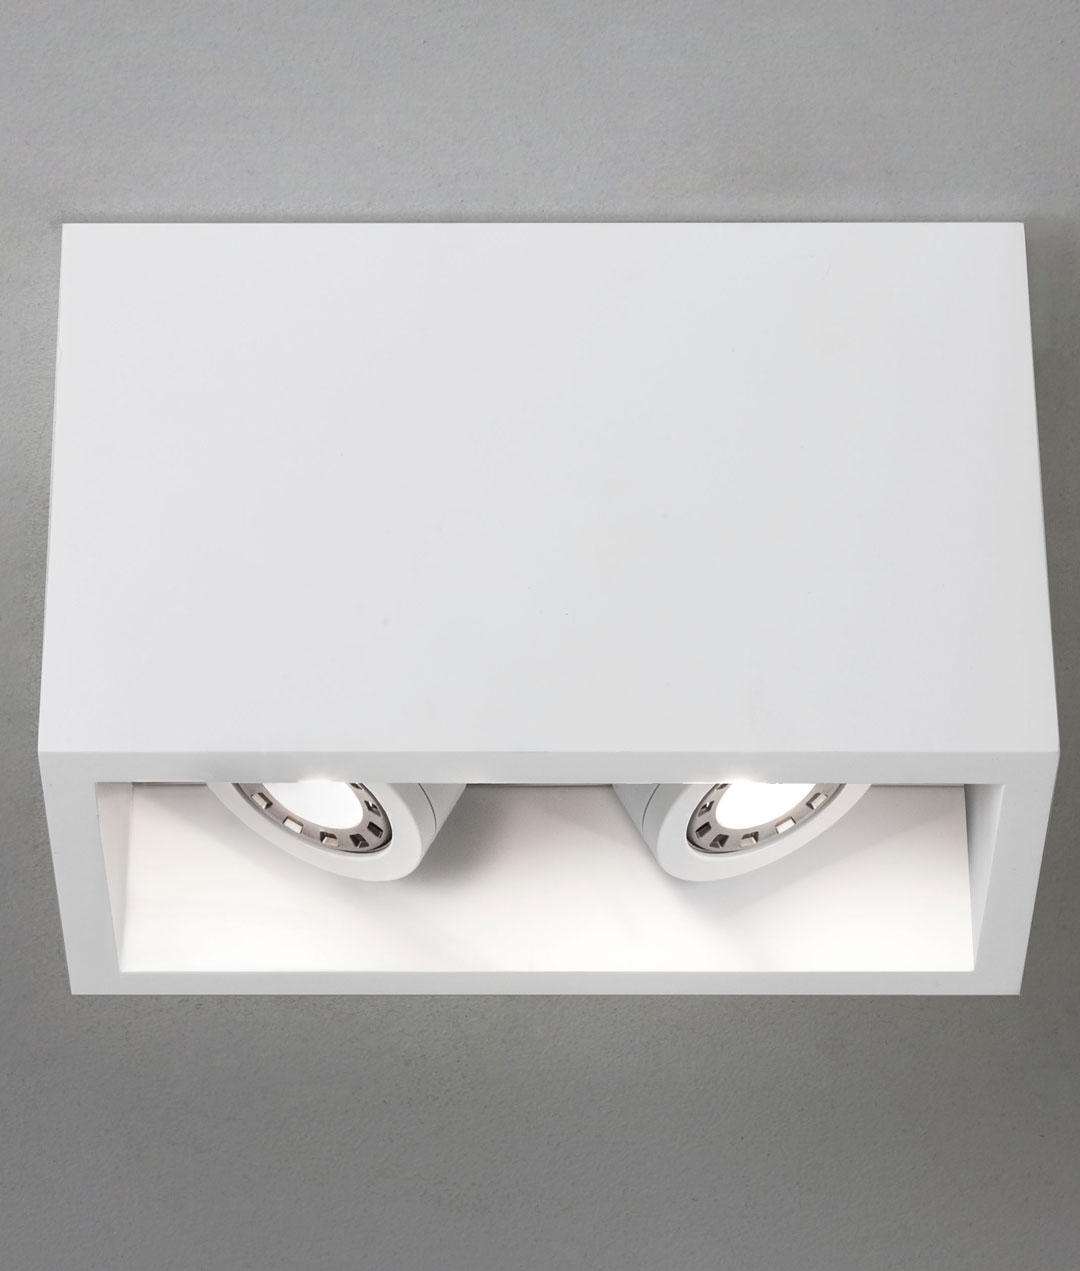 Surface Mounted Plaster Light Fixture With Two Adjustable Led